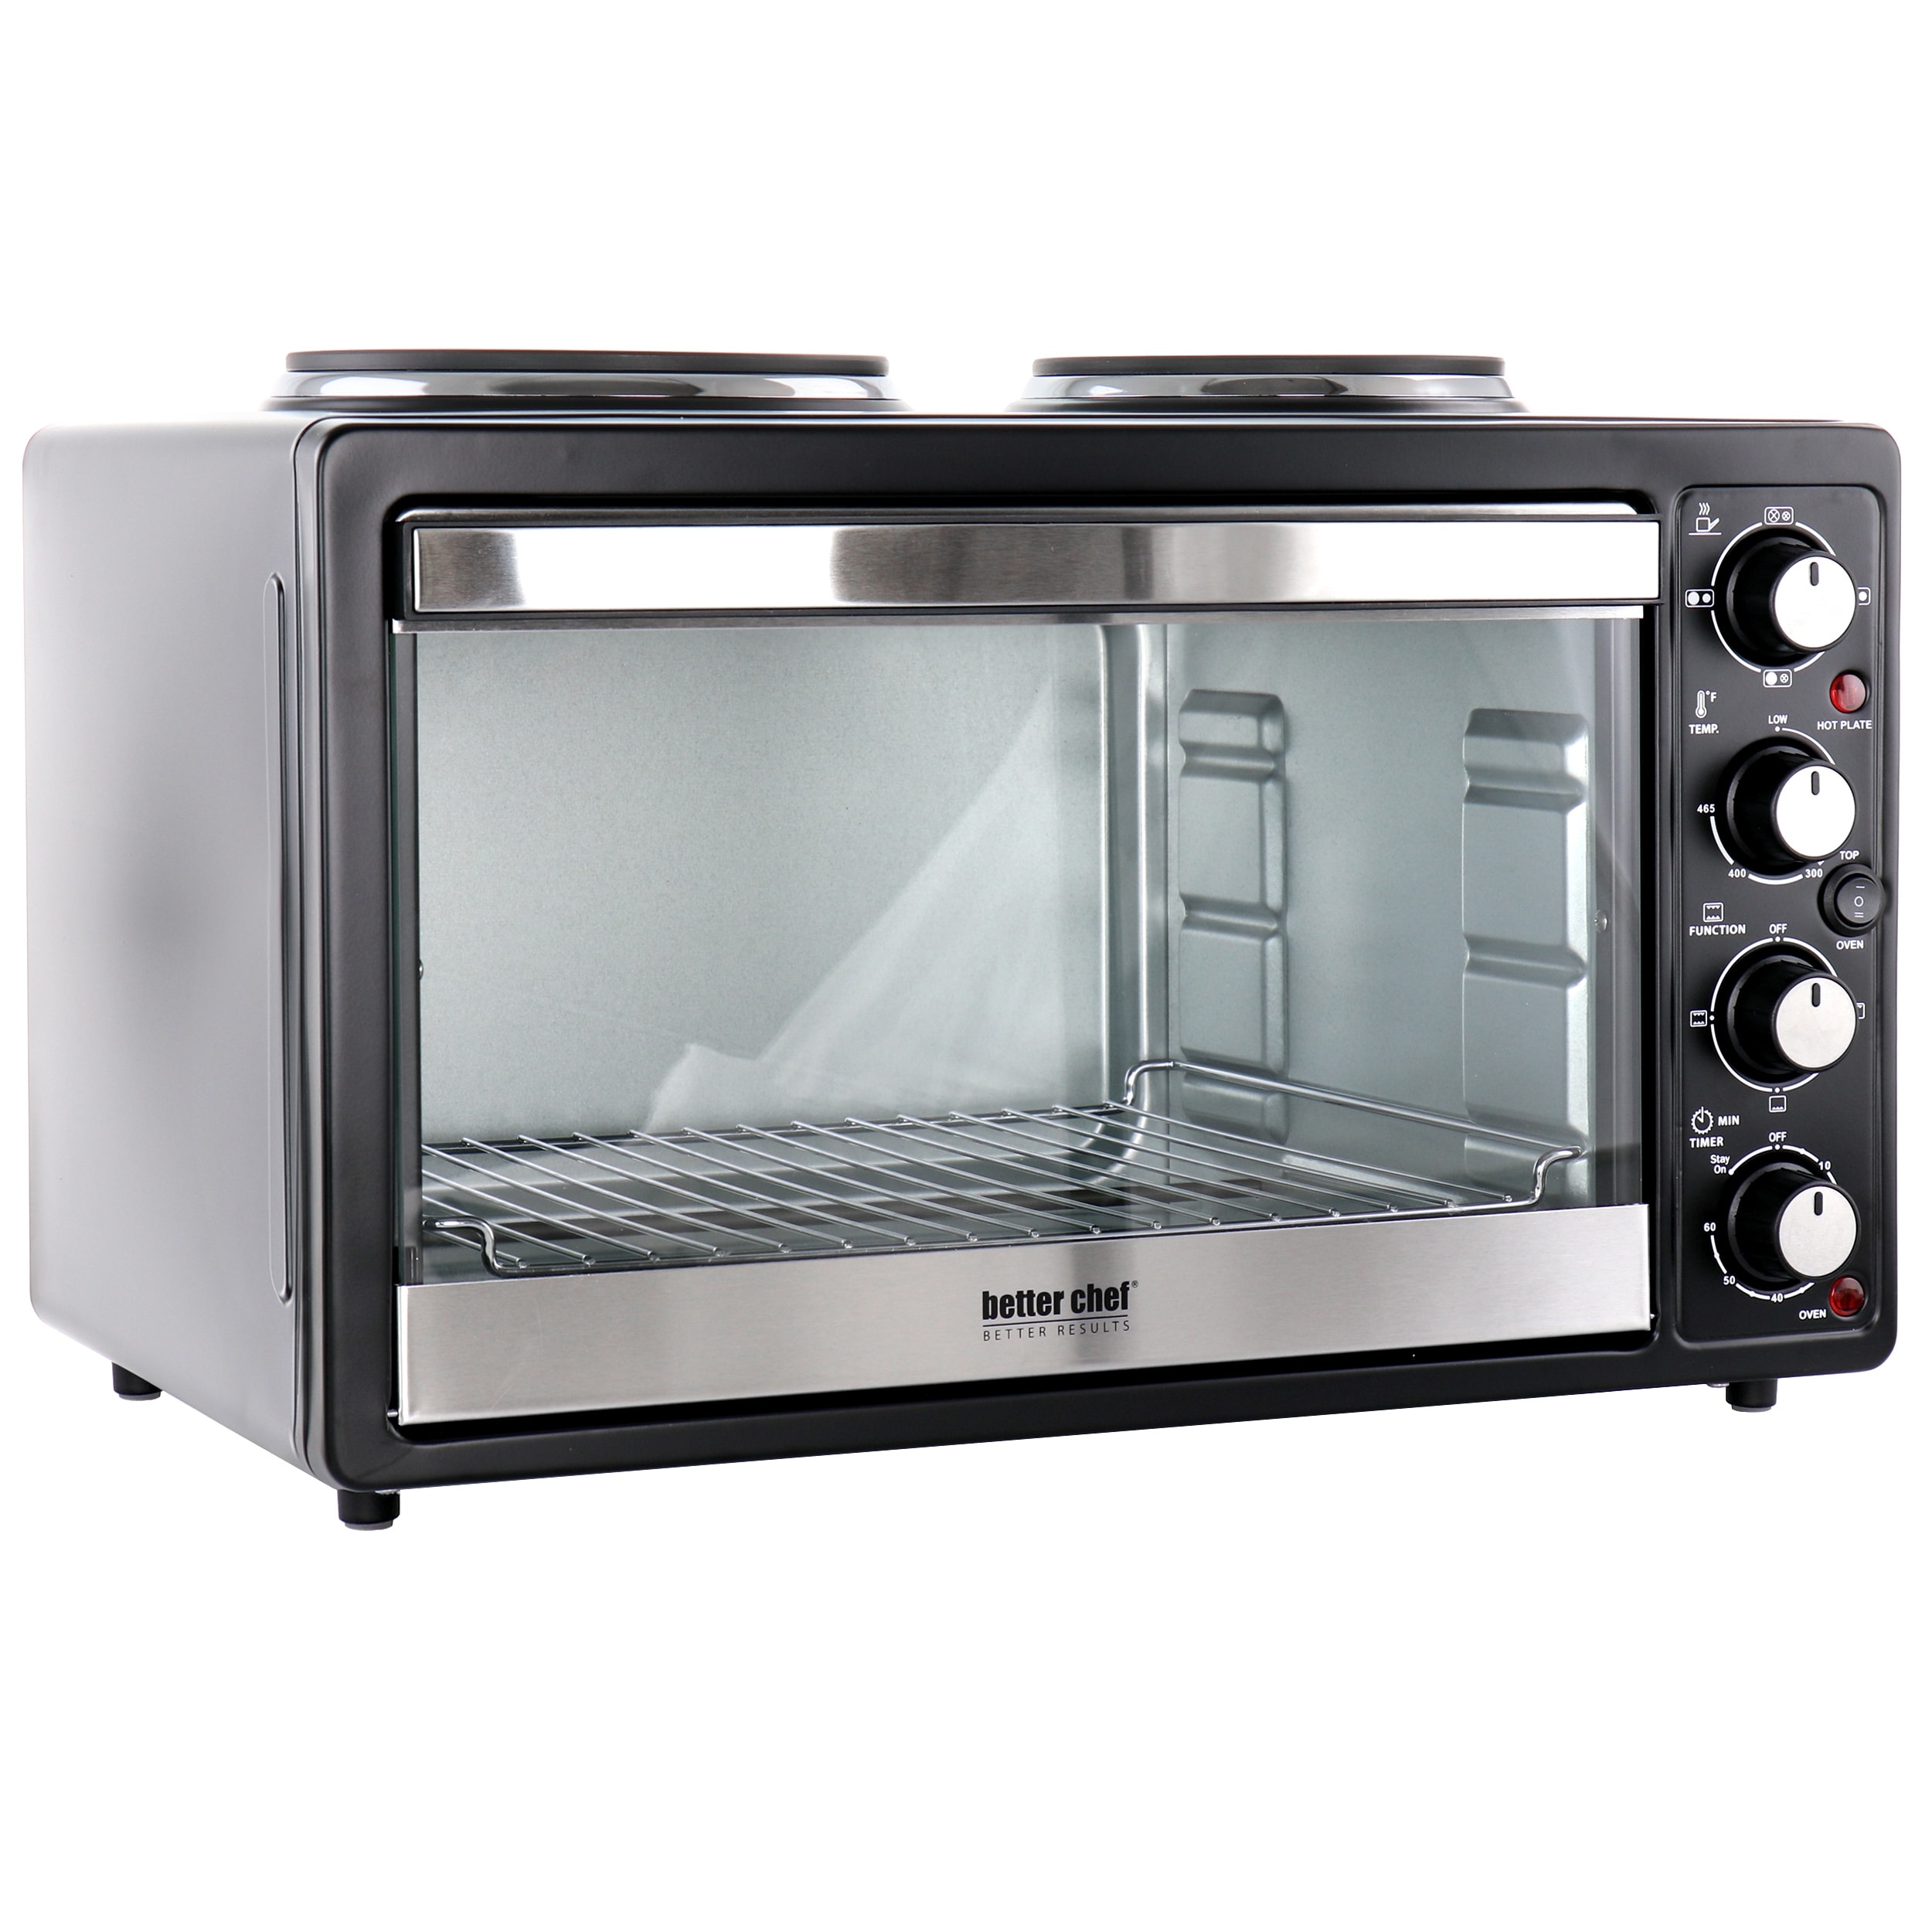 https://ak1.ostkcdn.com/images/products/is/images/direct/f80ccb7d9bc9331455b07452260d6326a9e04b6d/Better-Chef-Chef-Central-XL-Toaster-Oven-and-Broiler.jpg